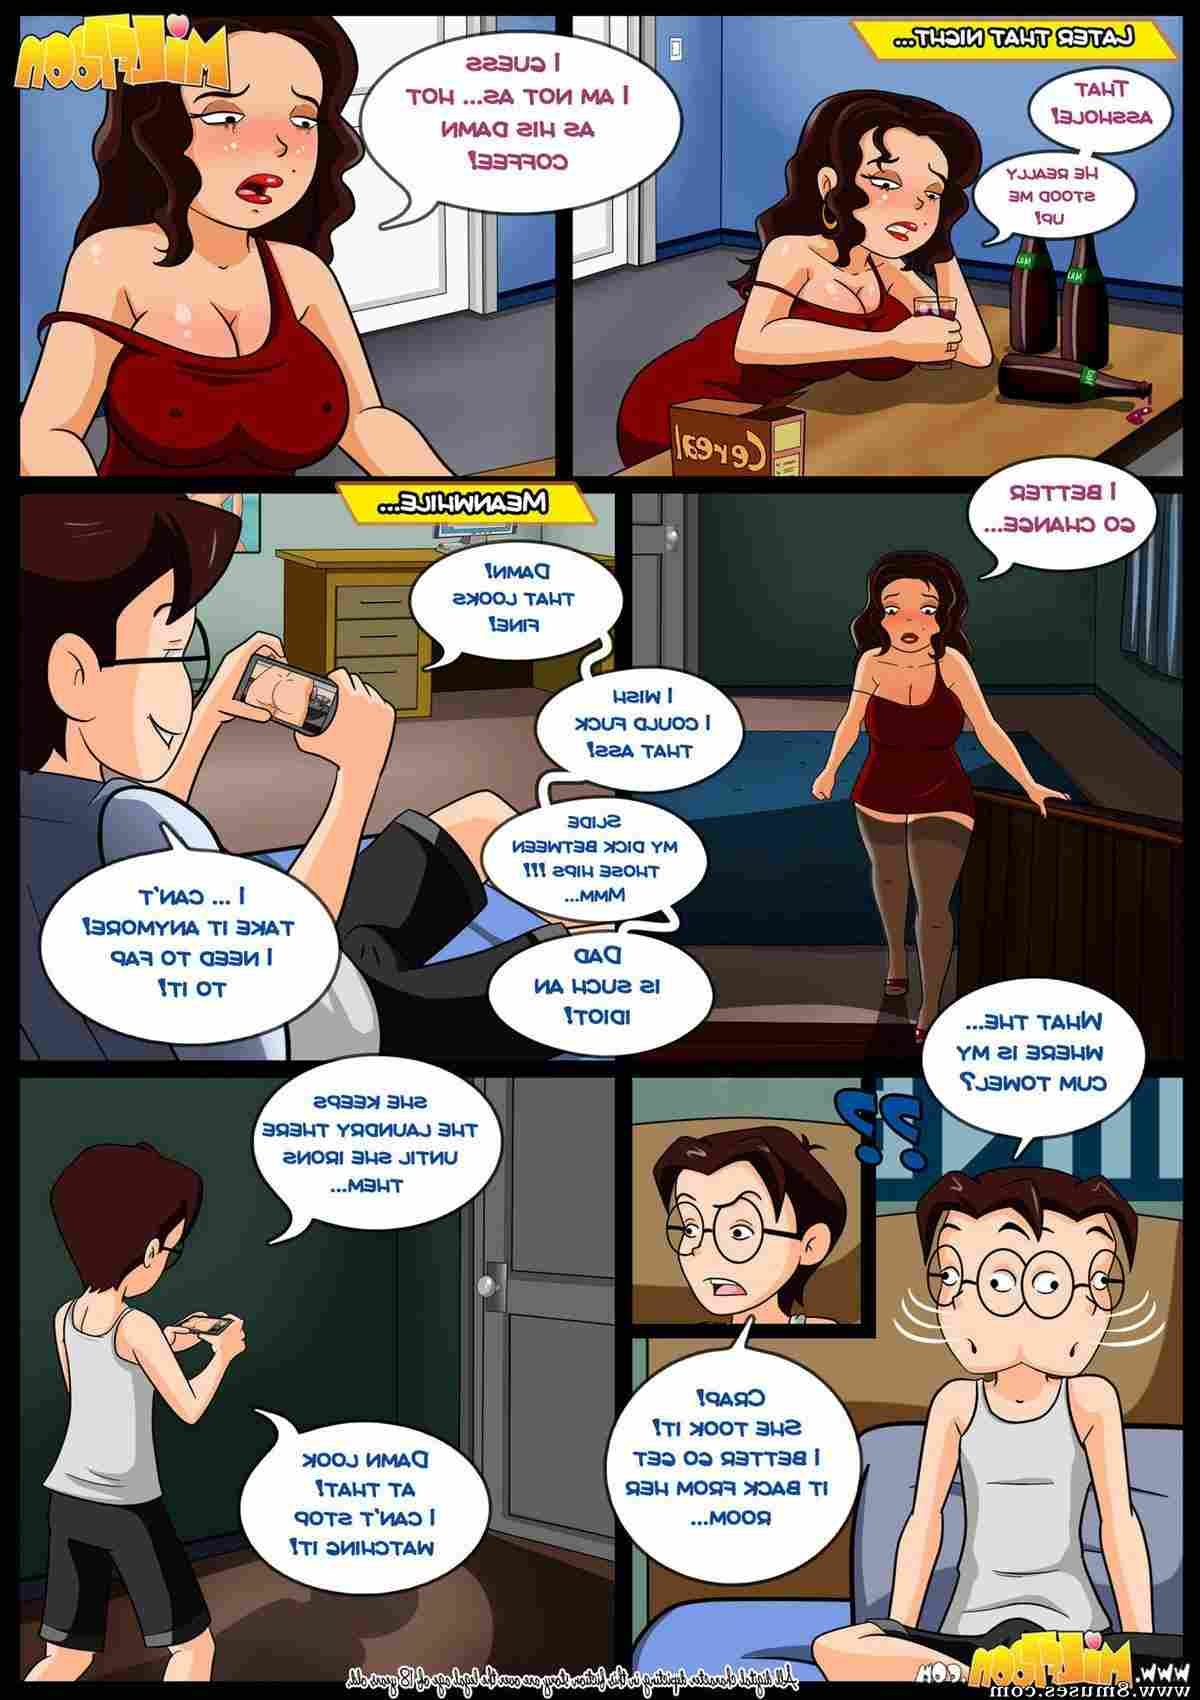 MilfToon-Comics/Wine-and-Dine Wine_and_Dine__8muses_-_Sex_and_Porn_Comics_8.jpg